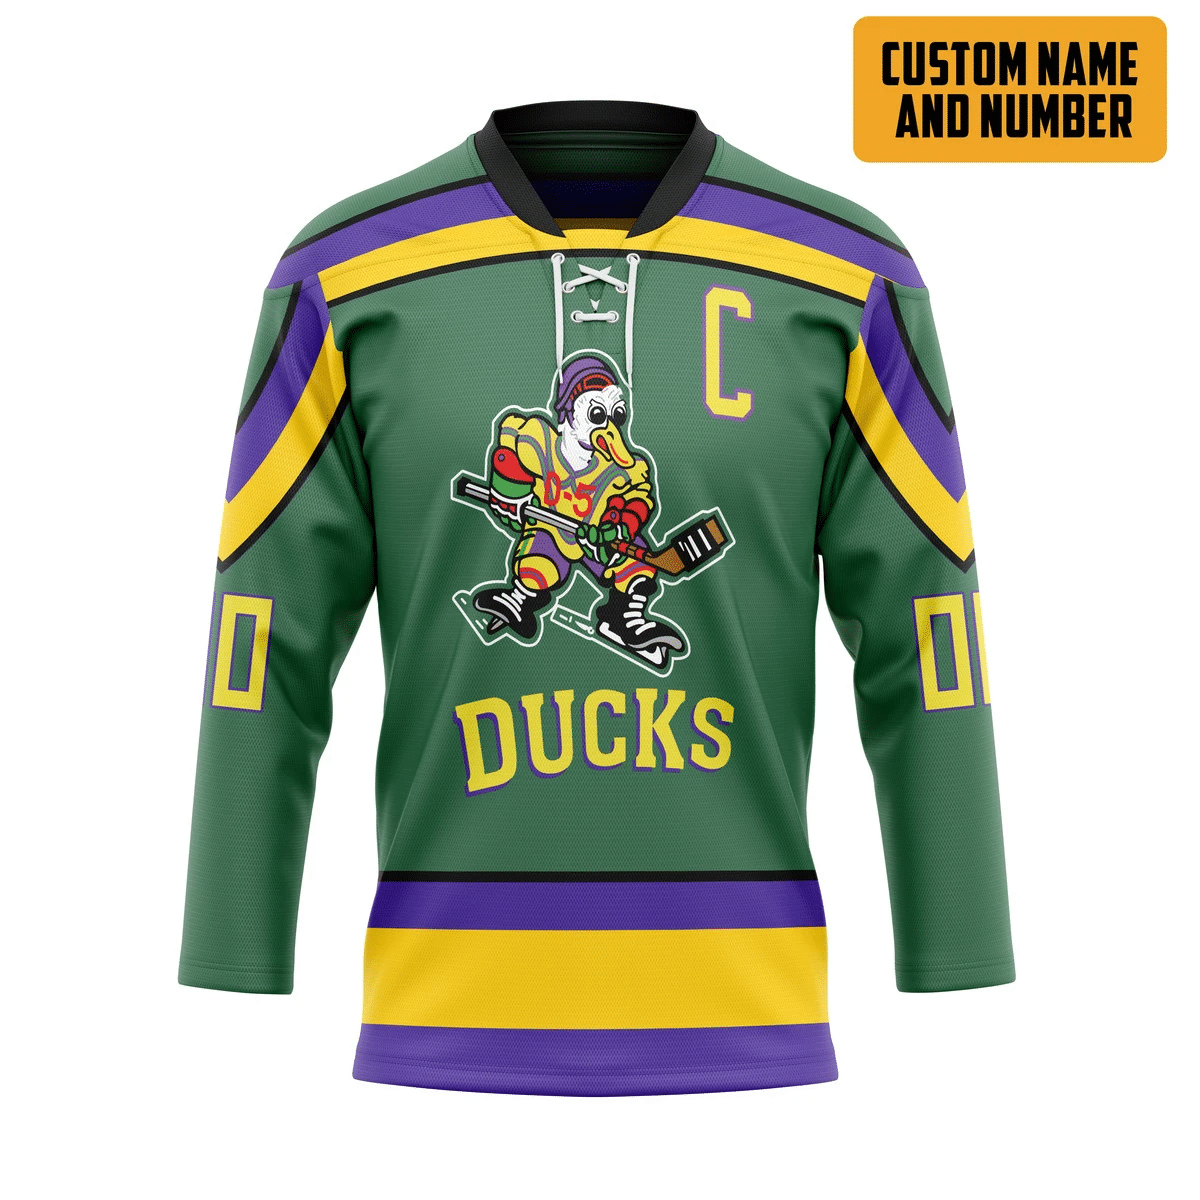 Choosing a hockey jersey is not as difficult as you think. 53